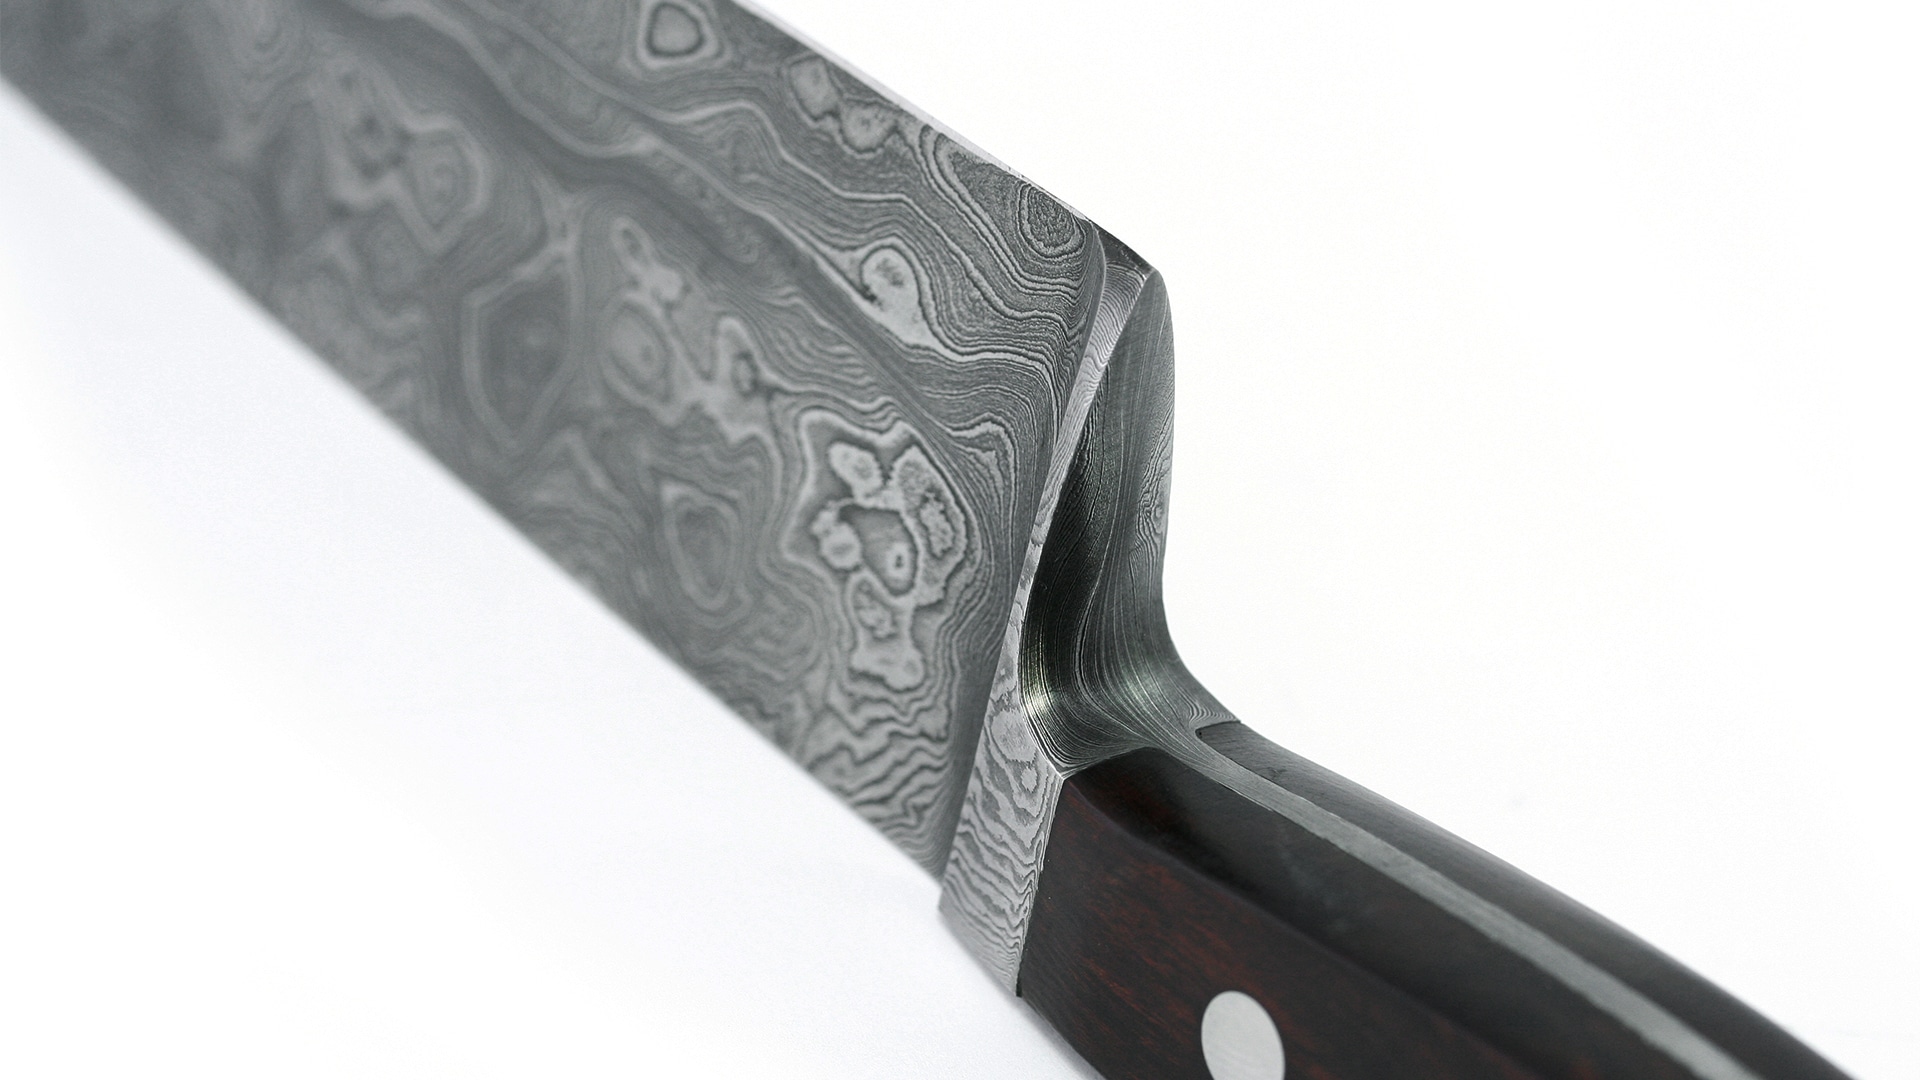 Güde chef's knife Damascus steel damask view